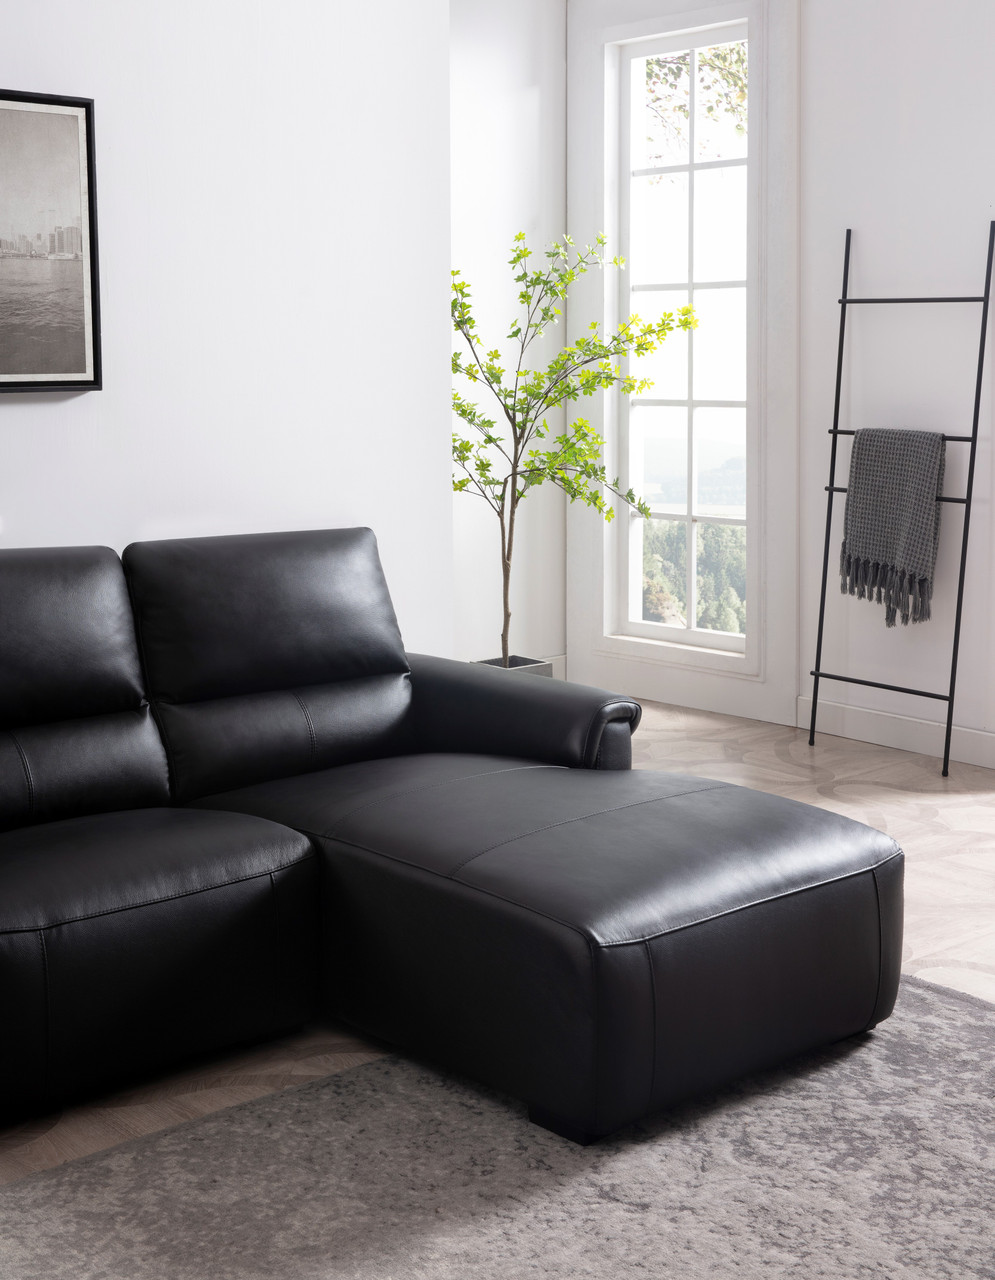 High End Leather Corner Sectional Sofa - Click Image to Close